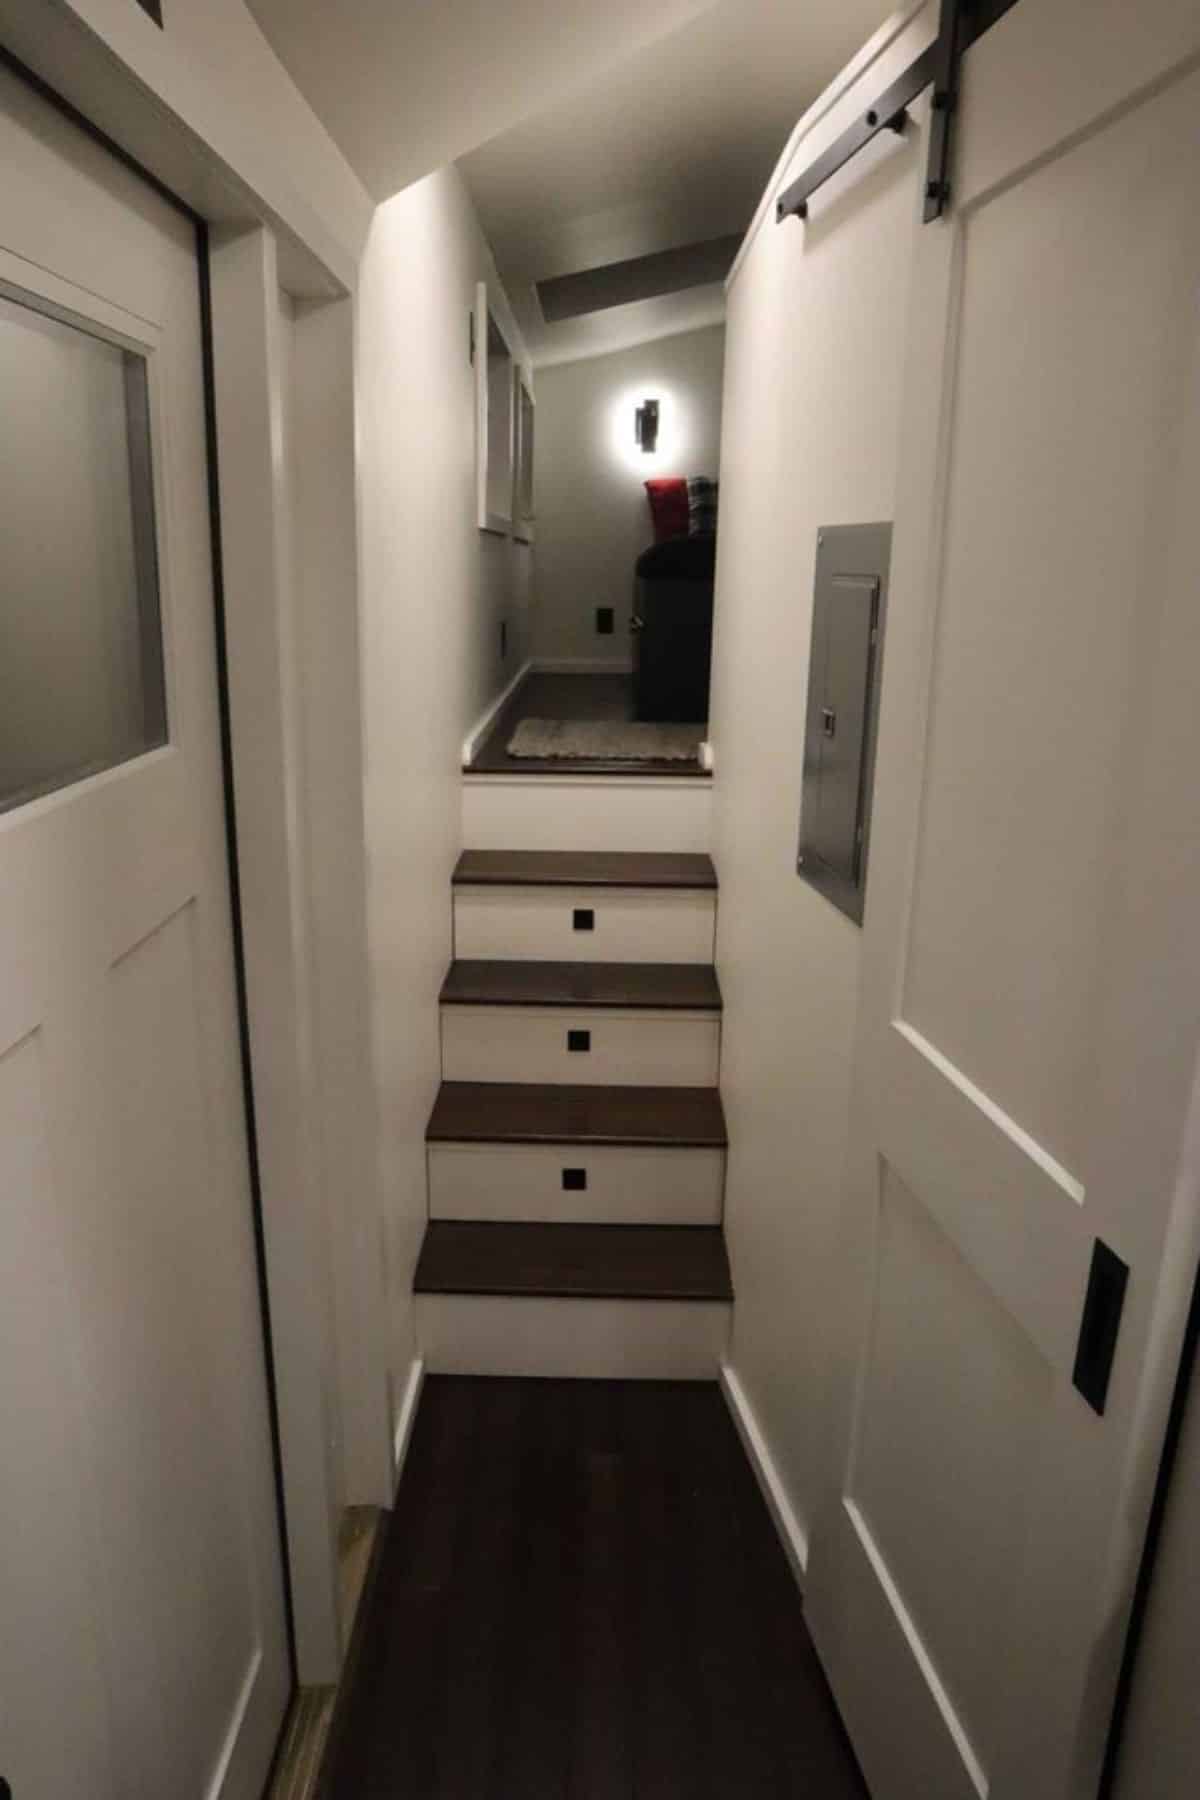 Stairs leading to the loft bedroom has storage underneath